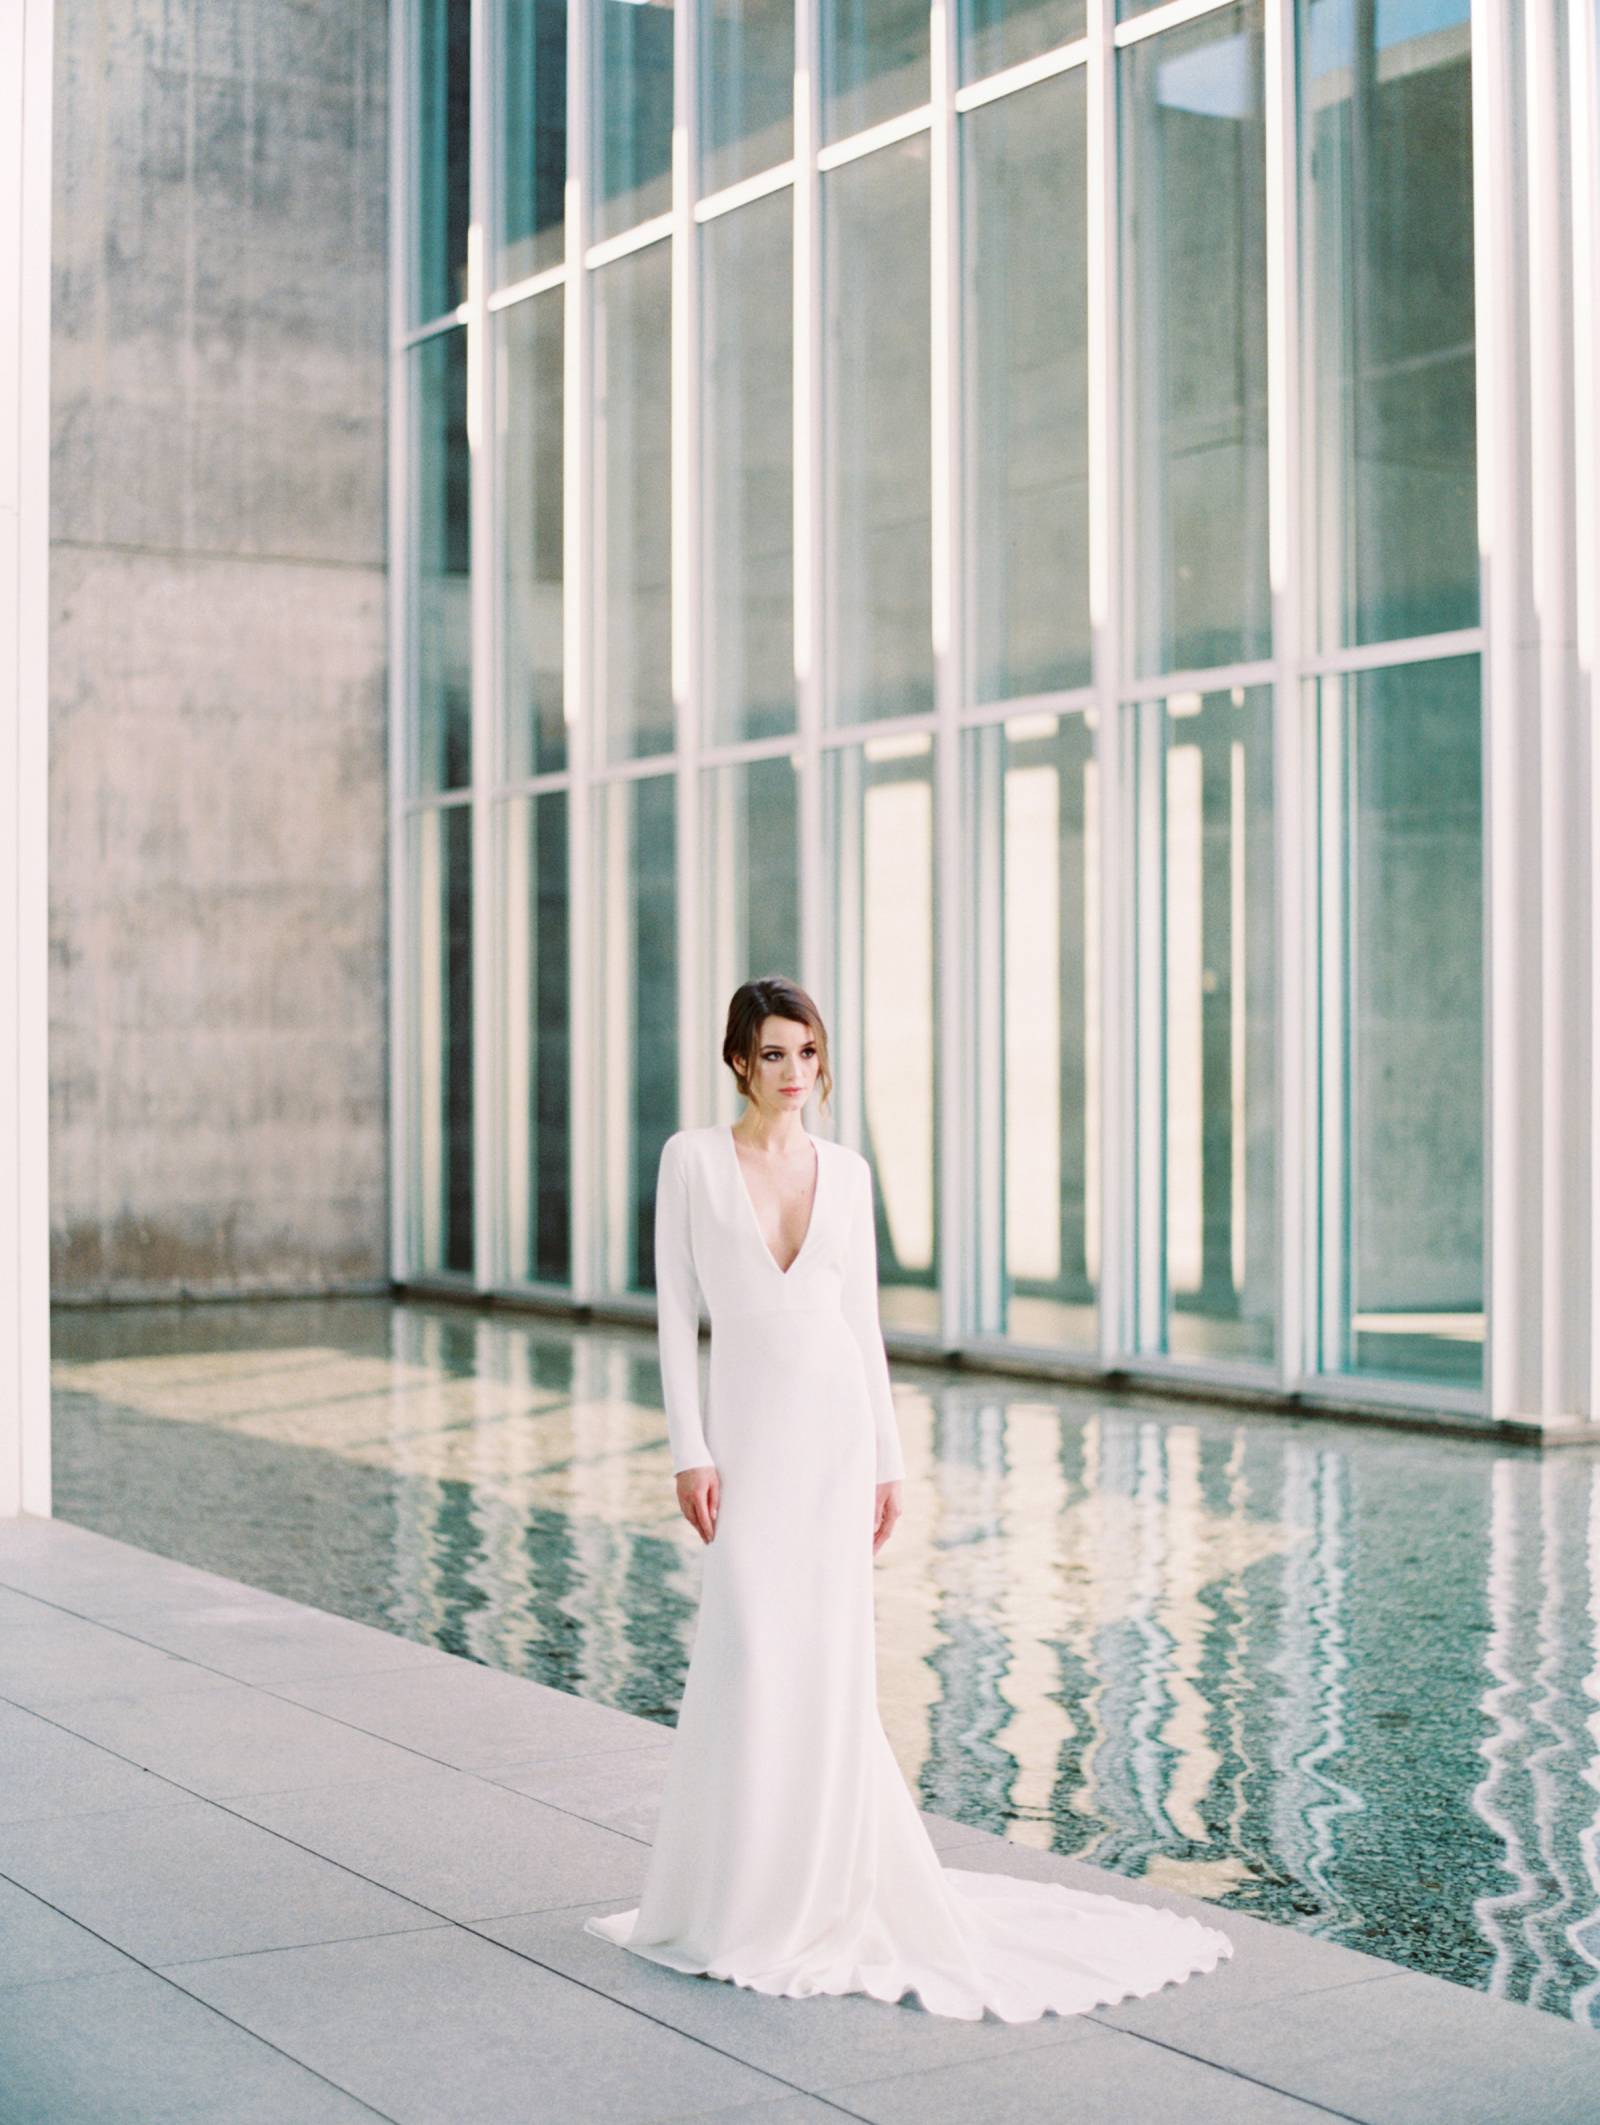 A minimalist wedding gown with a plunging neckline, long sleeves, a train for a Nordic bride